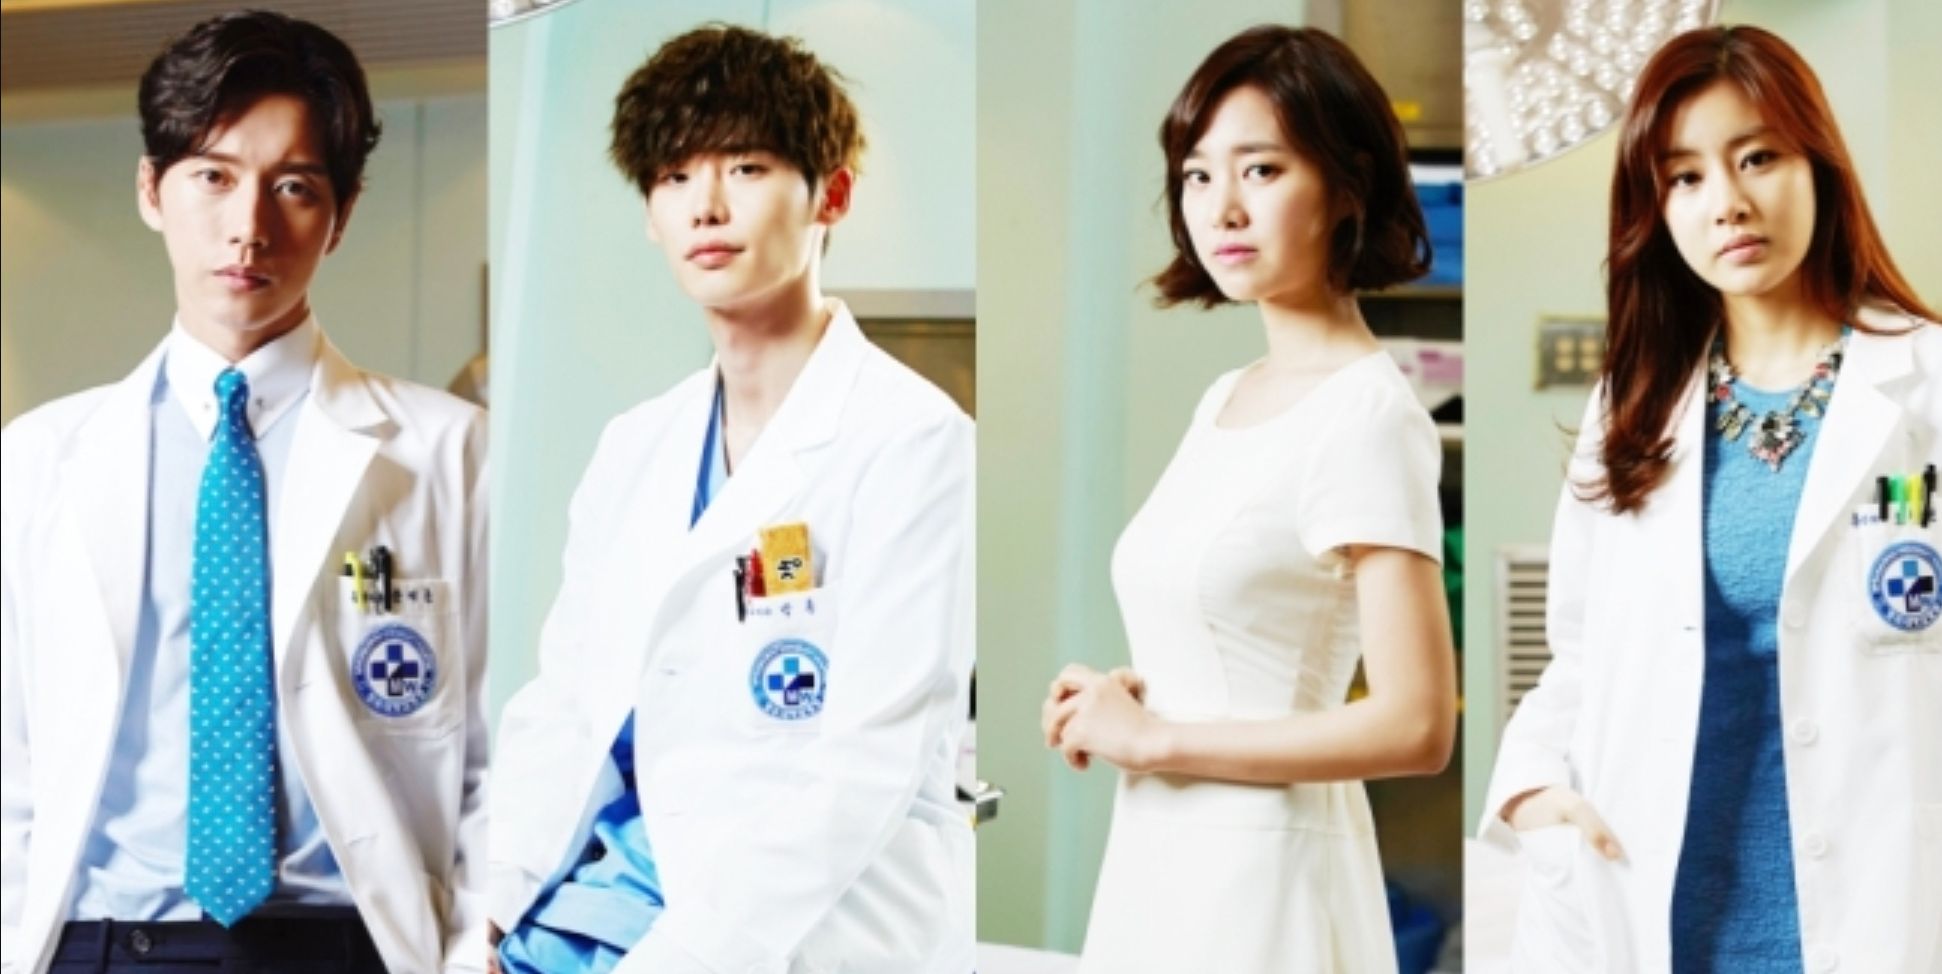 Four young medical professionals in the Korean drama Doctor Stranger